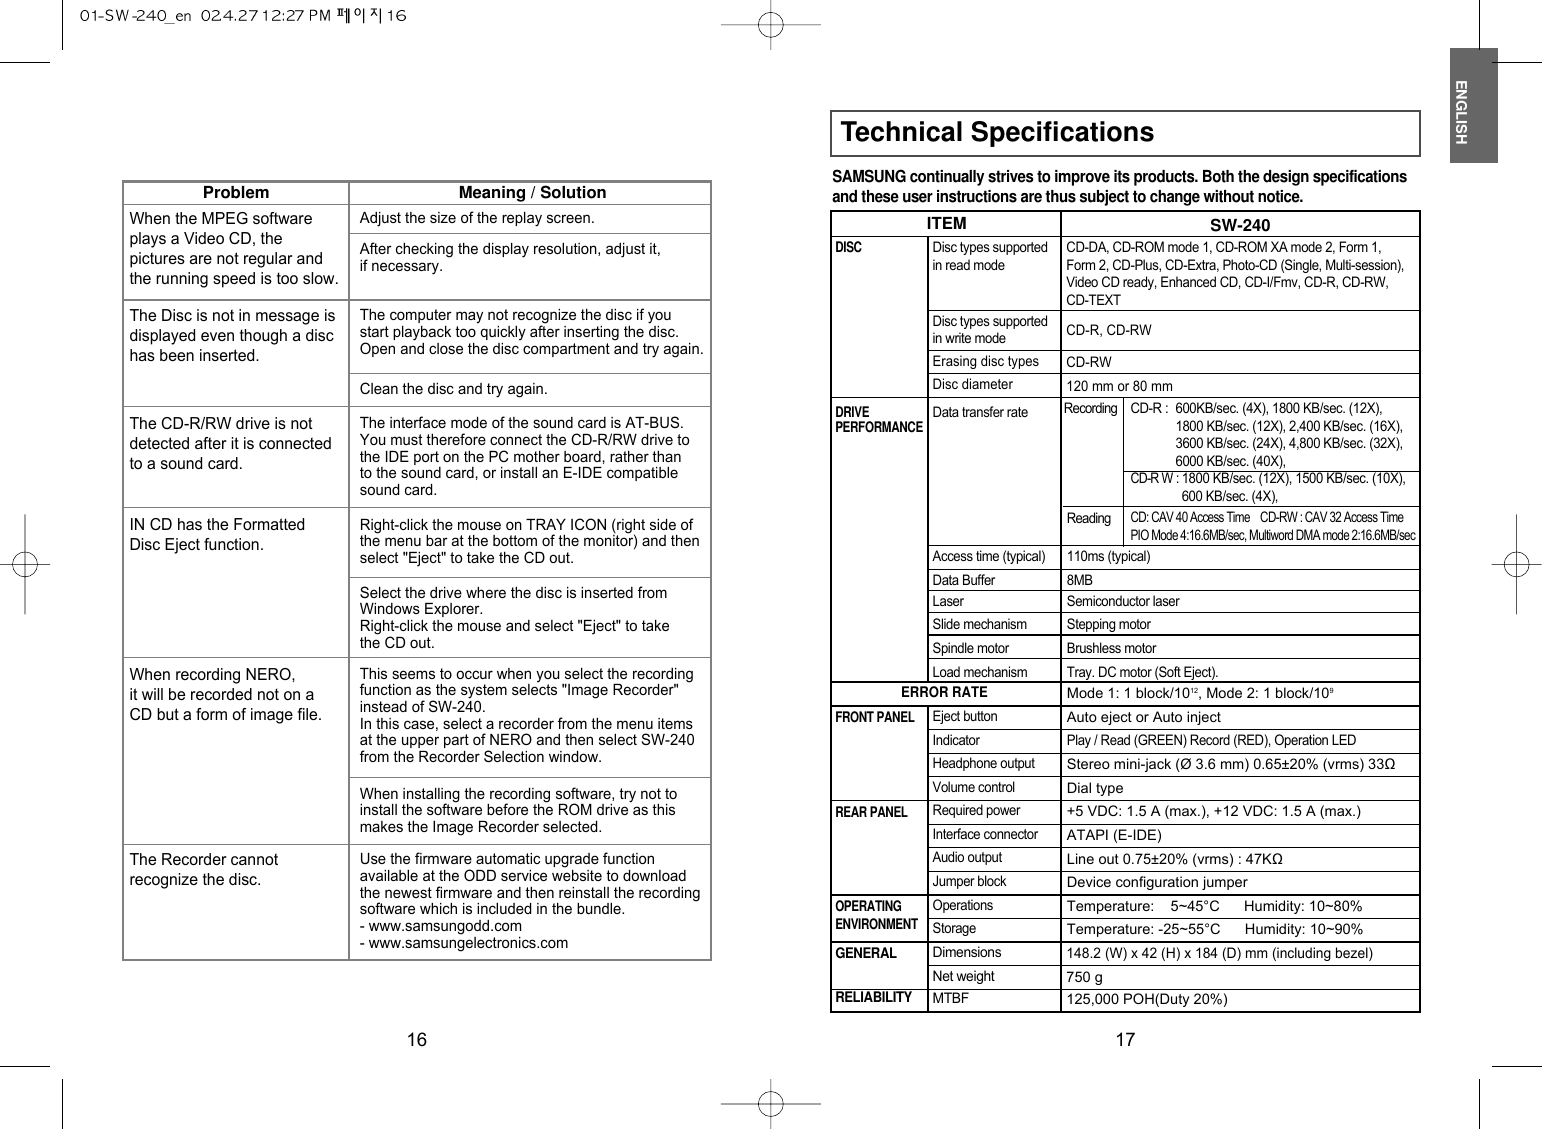 16Technical Specifications17ENGLISHSAMSUNG continually strives to improve its products. Both the design specificationsand these user instructions are thus subject to change without notice.DISCGENERALRELIABILITYDRIVEPERFORMANCEFRONT PANELREAR PANELOPERATINGENVIRONMENTDisc types supportedin write modeErasing disc typesDisc diameterDisc types supportedin read modeData transfer rateAccess time (typical)RecordingReadingCD-R : 600KB/sec. (4X), 1800 KB/sec. (12X),1800 KB/sec. (12X), 2,400 KB/sec. (16X), 3600 KB/sec. (24X), 4,800 KB/sec. (32X), 6000 KB/sec. (40X),CD-R W: 1800 KB/sec. (12X), 1500 KB/sec. (10X),600 KB/sec. (4X),CD: CAV 40 Access Time    CD-RW : CAV 32 Access TimePIO Mode 4:16.6MB/sec, Multiword DMA mode 2:16.6MB/sec110ms (typical)Data Buffer 8MBLaser Semiconductor laserSlide mechanism Stepping motorSpindle motor Brushless motorLoad mechanismERROR RATEEject buttonIndicatorHeadphone outputVolume controlRequired powerInterface connectorAudio outputJumper blockTray. DC motor (Soft Eject).Mode 1: 1 block/1012, Mode 2: 1 block/109Auto eject or Auto injectPlay / Read (GREEN) Record (RED), Operation LEDStereo mini-jack (Ø 3.6 mm) 0.65±20% (vrms) 33ΩDial type+5 VDC: 1.5 A (max.), +12 VDC: 1.5 A (max.)ATAPI (E-IDE)Line out 0.75±20% (vrms) : 47KΩDevice configuration jumperOperationsTemperature:    5~45°C      Humidity: 10~80%StorageTemperature: -25~55°C      Humidity: 10~90%Dimensions Net weightMTBFCD-DA, CD-ROM mode 1, CD-ROM XA mode 2, Form 1,Form 2, CD-Plus, CD-Extra, Photo-CD (Single, Multi-session),Video CD ready, Enhanced CD, CD-I/Fmv, CD-R, CD-RW,CD-TEXTCD-R, CD-RWCD-RW120 mm or 80 mm148.2 (W) x 42 (H) x 184 (D) mm (including bezel)750 g125,000 POH(Duty 20%)ITEM SW-240ProblemWhen the MPEG softwareplays a Video CD, thepictures are not regular andthe running speed is too slow.Adjust the size of the replay screen.The Disc is not in message isdisplayed even though a dischas been inserted.The computer may not recognize the disc if youstart playback too quickly after inserting the disc.Open and close the disc compartment and try again.The CD-R/RW drive is notdetected after it is connectedto a sound card.The interface mode of the sound card is AT-BUS.You must therefore connect the CD-R/RW drive tothe IDE port on the PC mother board, rather thanto the sound card, or install an E-IDE compatiblesound card.Clean the disc and try again.After checking the display resolution, adjust it,if necessary.Meaning / SolutionIN CD has the FormattedDisc Eject function.Right-click the mouse on TRAY ICON (right side ofthe menu bar at the bottom of the monitor) and thenselect &quot;Eject&quot; to take the CD out.Select the drive where the disc is inserted fromWindows Explorer.Right-click the mouse and select &quot;Eject&quot; to takethe CD out.When recording NERO,it will be recorded not on aCD but a form of image file.This seems to occur when you select the recordingfunction as the system selects &quot;Image Recorder&quot;instead of SW-240.In this case, select a recorder from the menu itemsat the upper part of NERO and then select SW-240from the Recorder Selection window.The Recorder cannotrecognize the disc.Use the firmware automatic upgrade functionavailable at the ODD service website to downloadthe newest firmware and then reinstall the recordingsoftware which is included in the bundle.- www.samsungodd.com- www.samsungelectronics.comWhen installing the recording software, try not toinstall the software before the ROM drive as thismakes the Image Recorder selected.